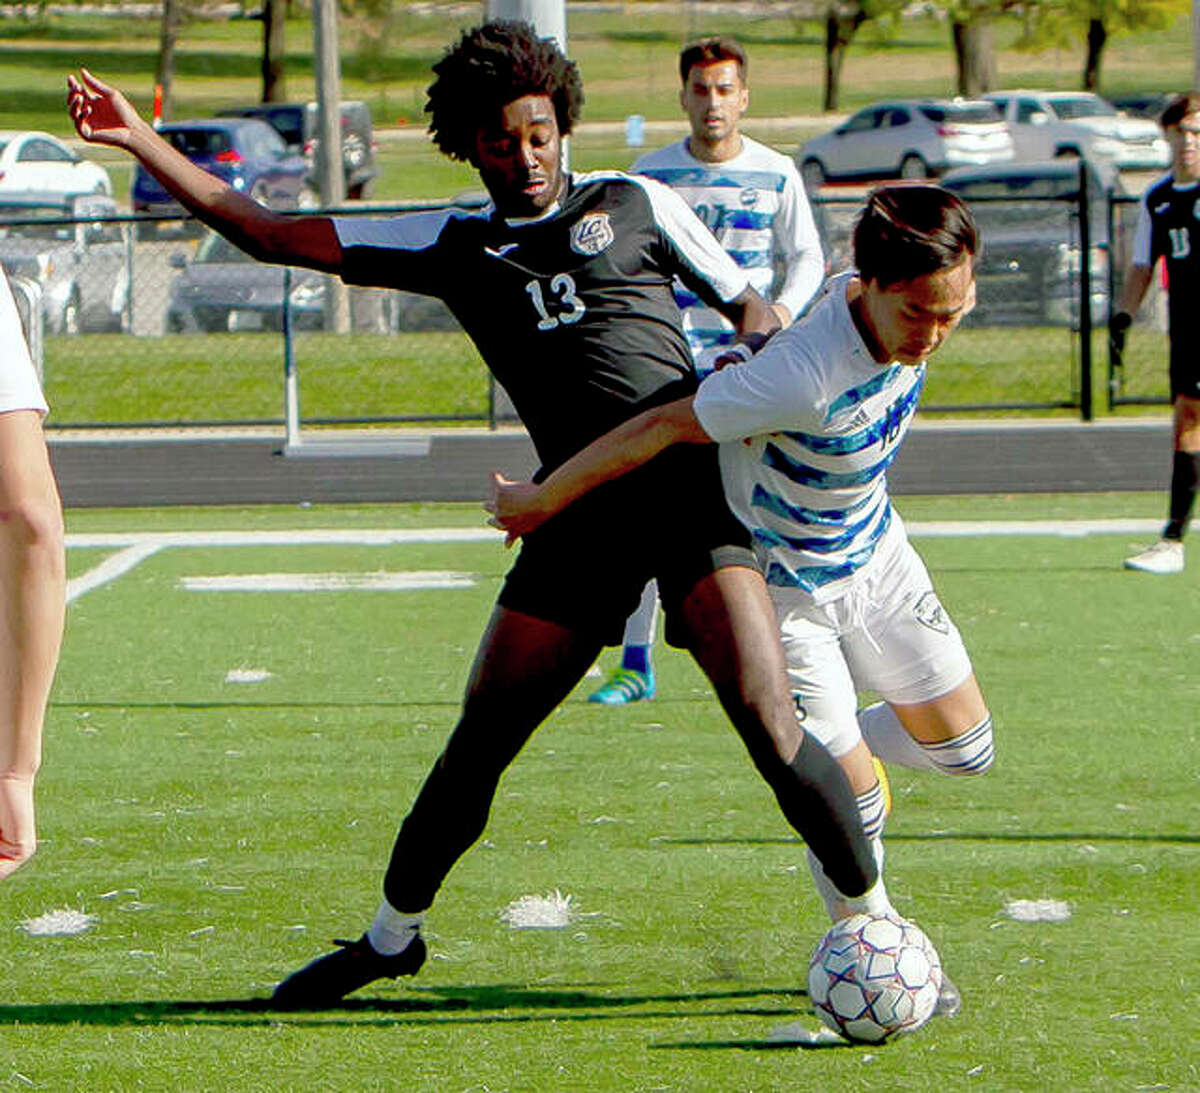 Jahari Lawrence of Lewis and Clark, left and Iowa Western’s Arata Saegusa battle for the ball during Friday’s NJCAA Division I Midwest district Tournament semifinals in Council Bluffs, Iowa.